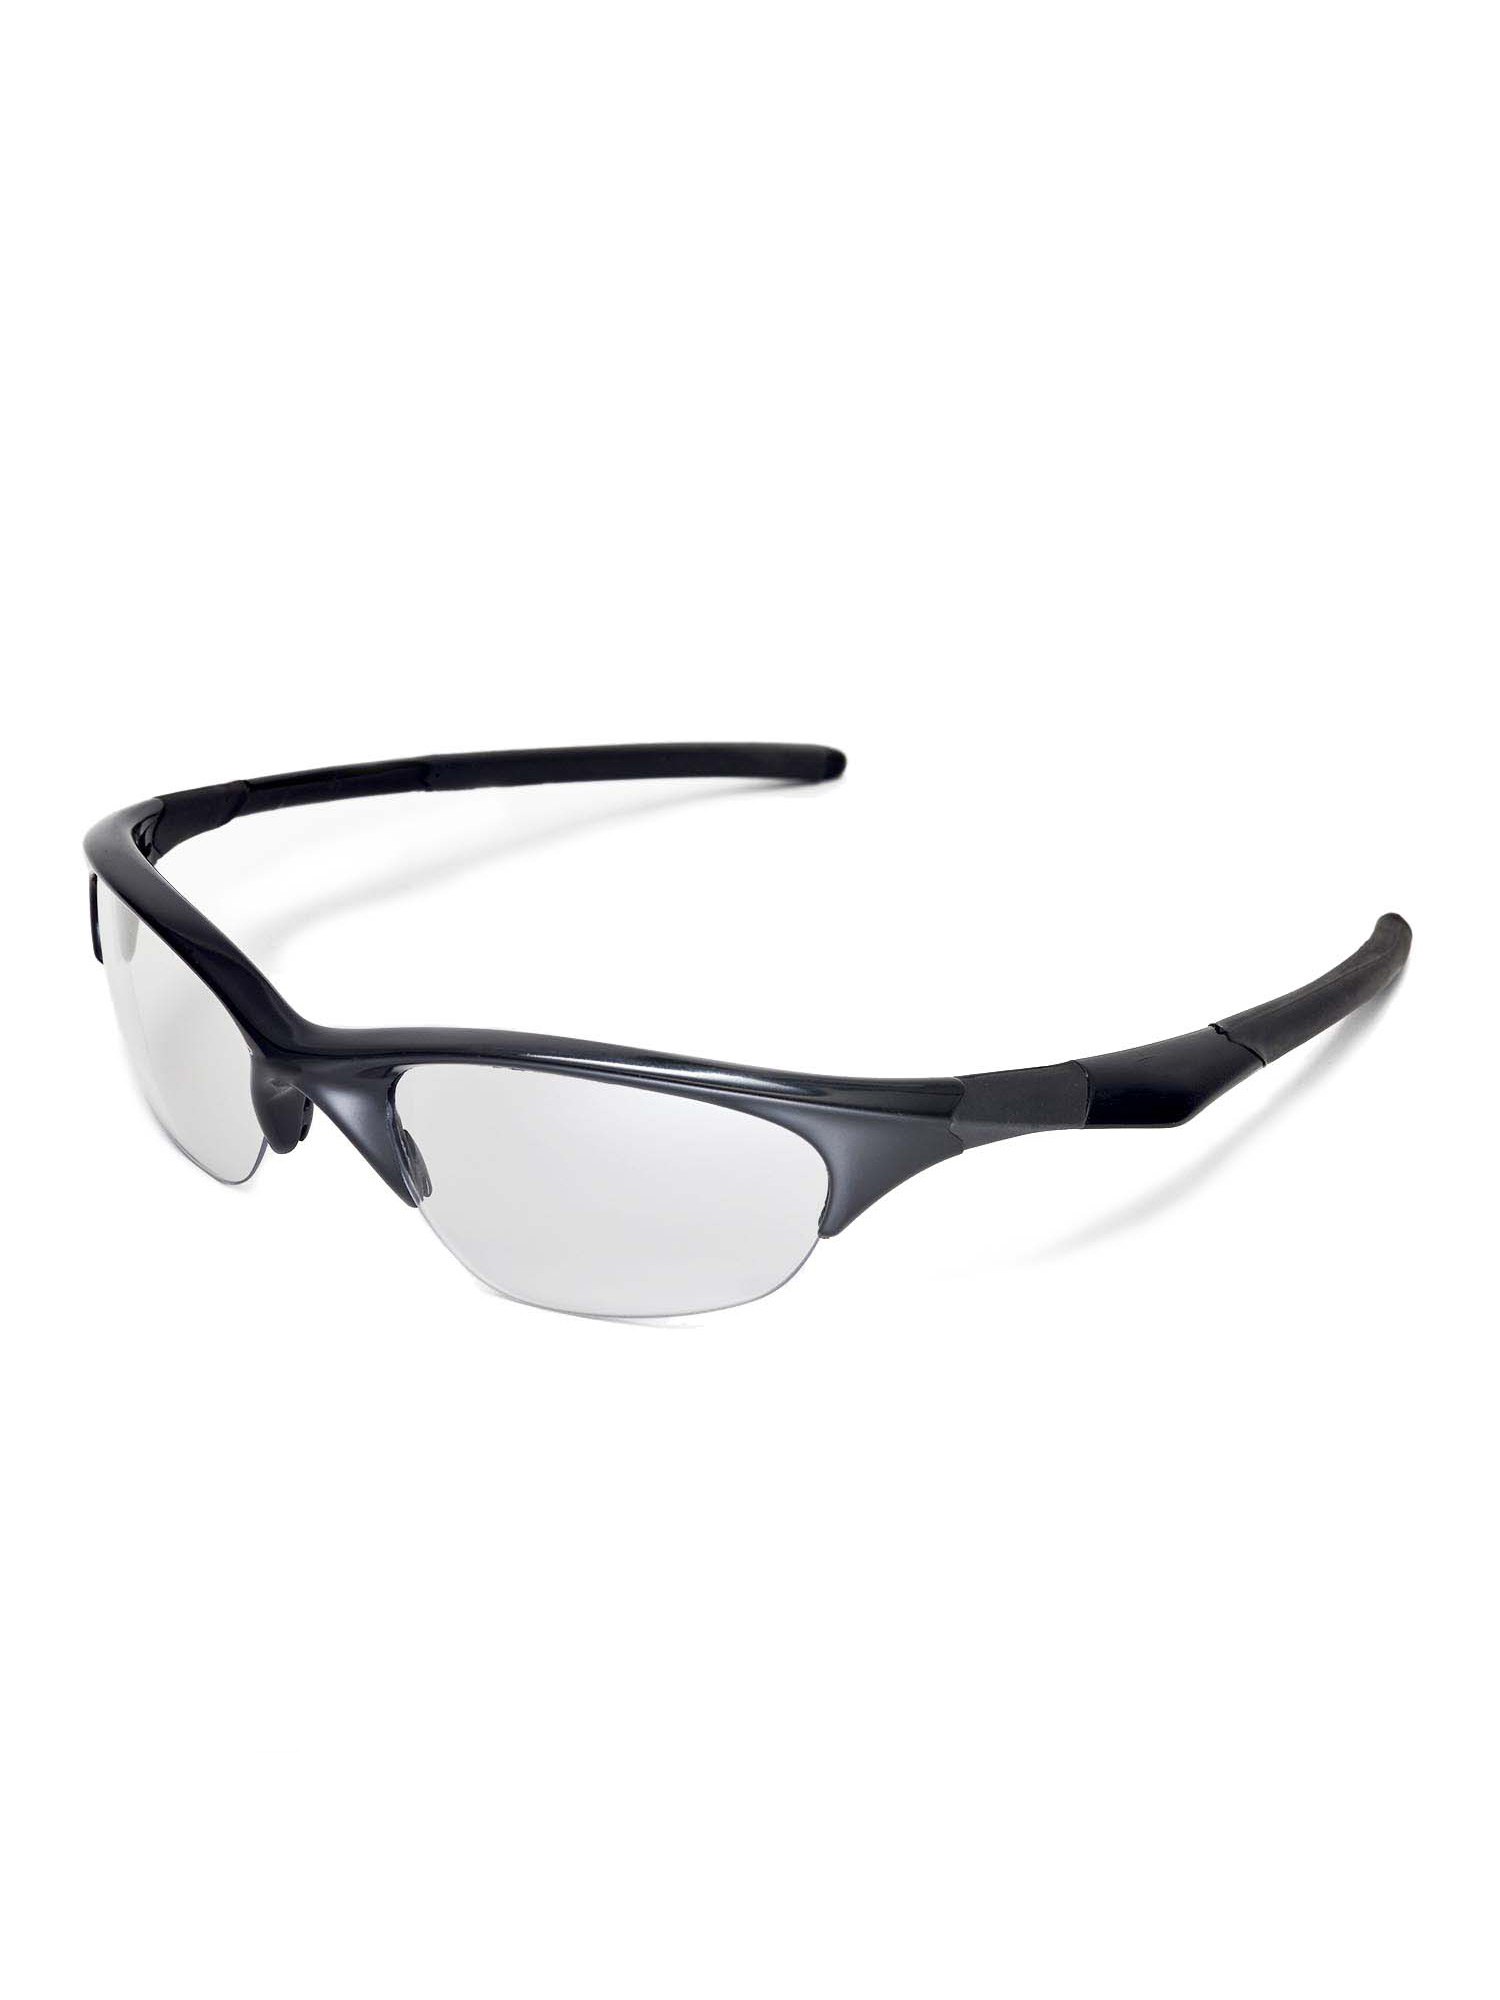 Walleva Clear Replacement Lenses for Oakley Half Jacket Sunglasses - image 4 of 7